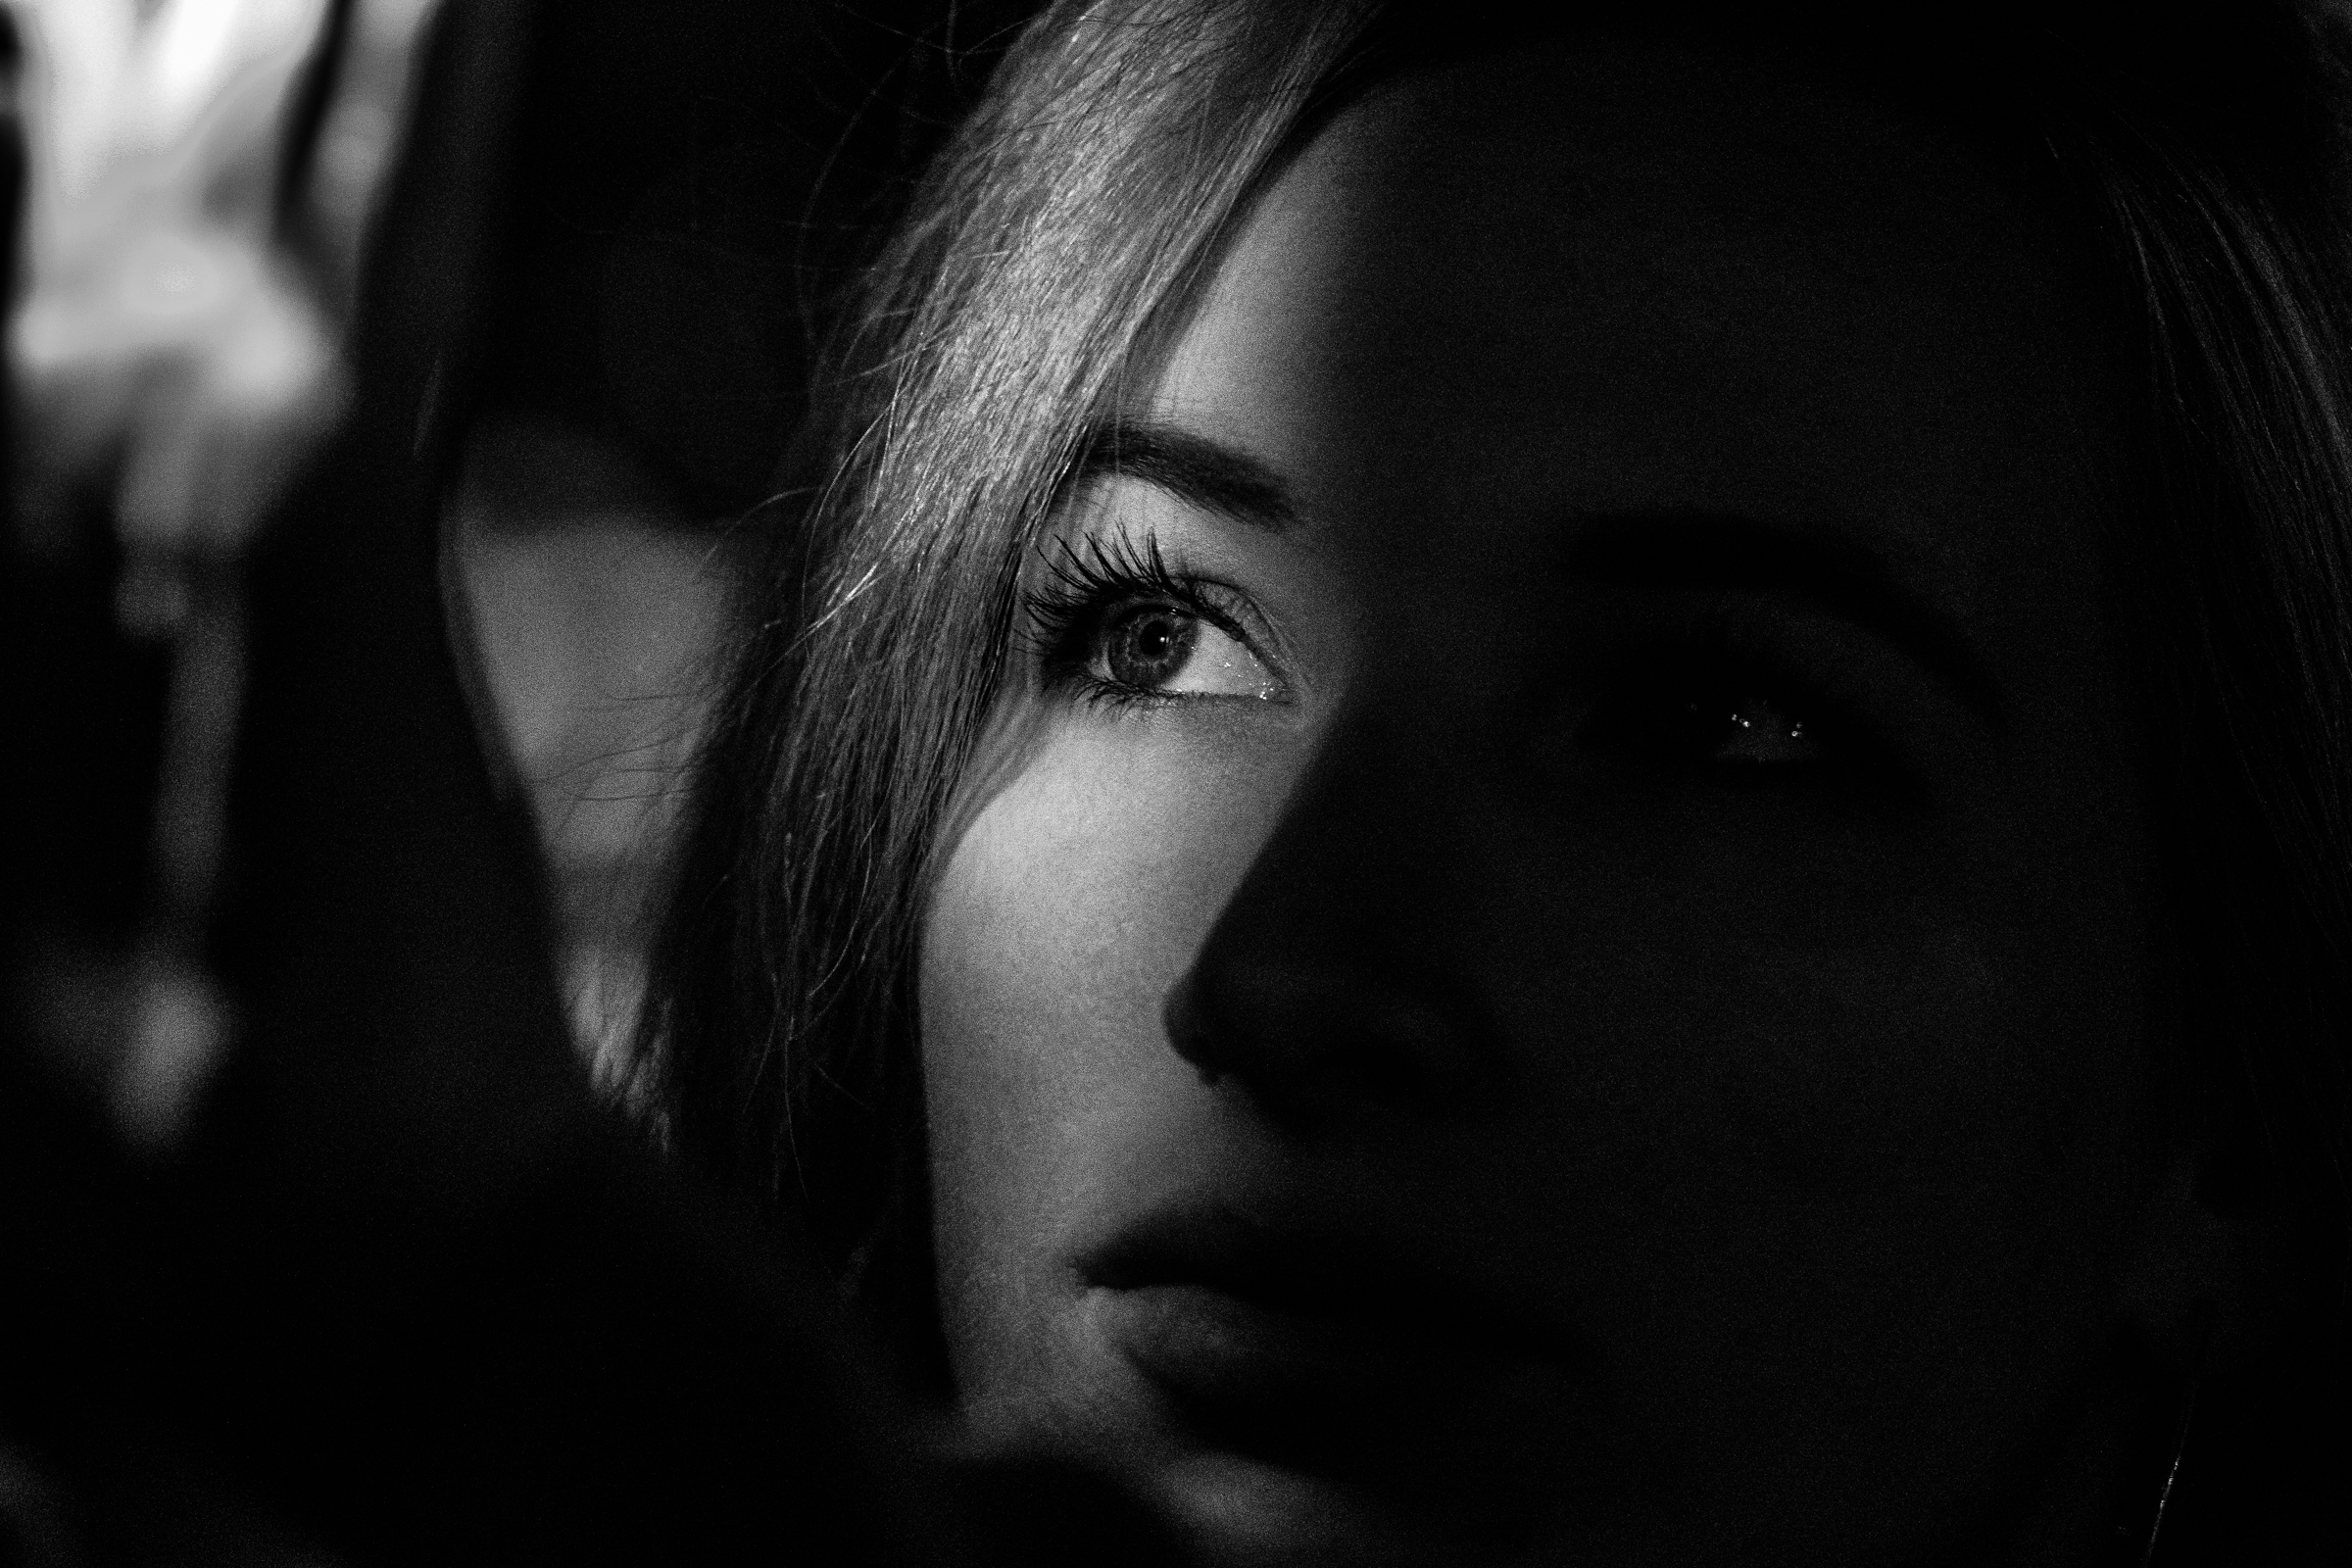 Black-and-white close-up of a woman's face looking at a light source. Only the right eye is lit up, the rest fades into the shadows.